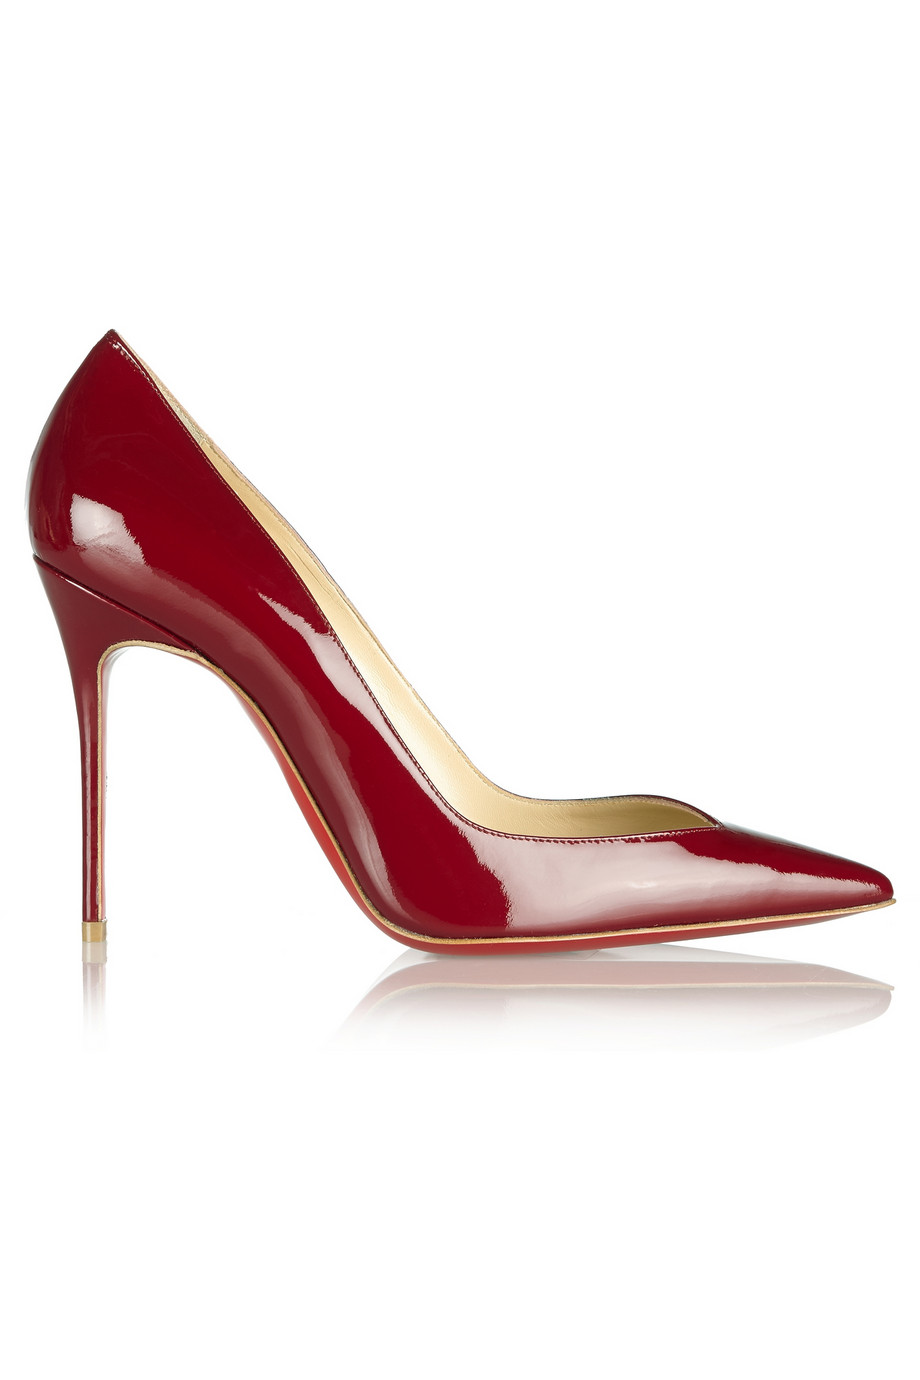 Christian Louboutin Completa 100 Patentleather Pumps in Burgundy (Red ...